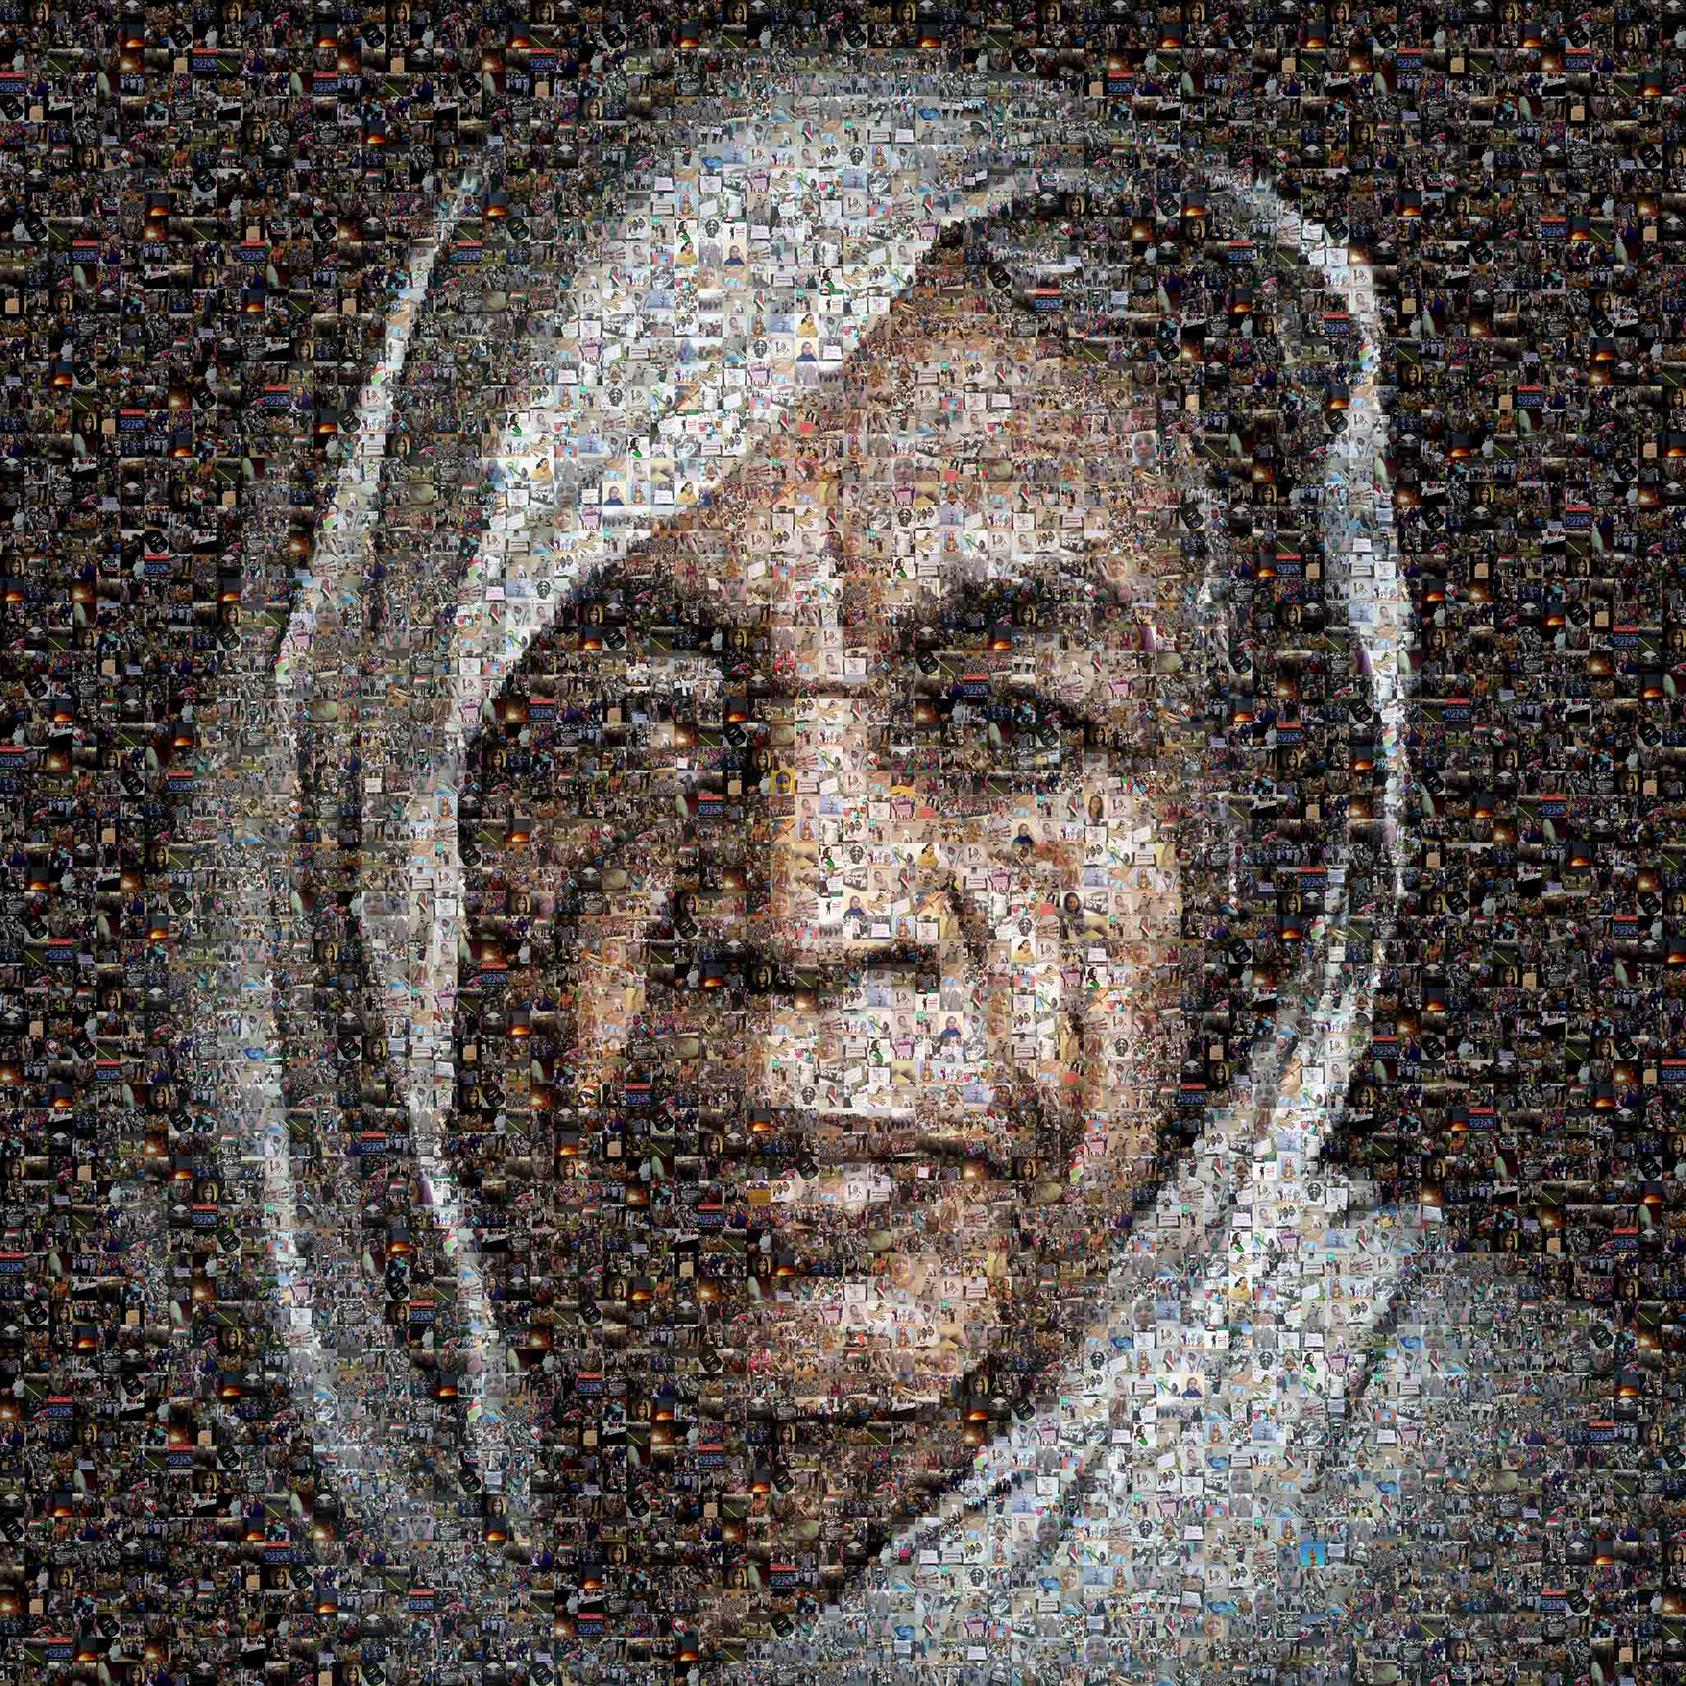 Merghani Salih’s mosaic of the ‘The Kandaka’ highlighted women’s contribution to the revolution. Originally shared on social media, it was later shared in news media, at venues internationally, and at the military headquarters sit-in in May 2019. 